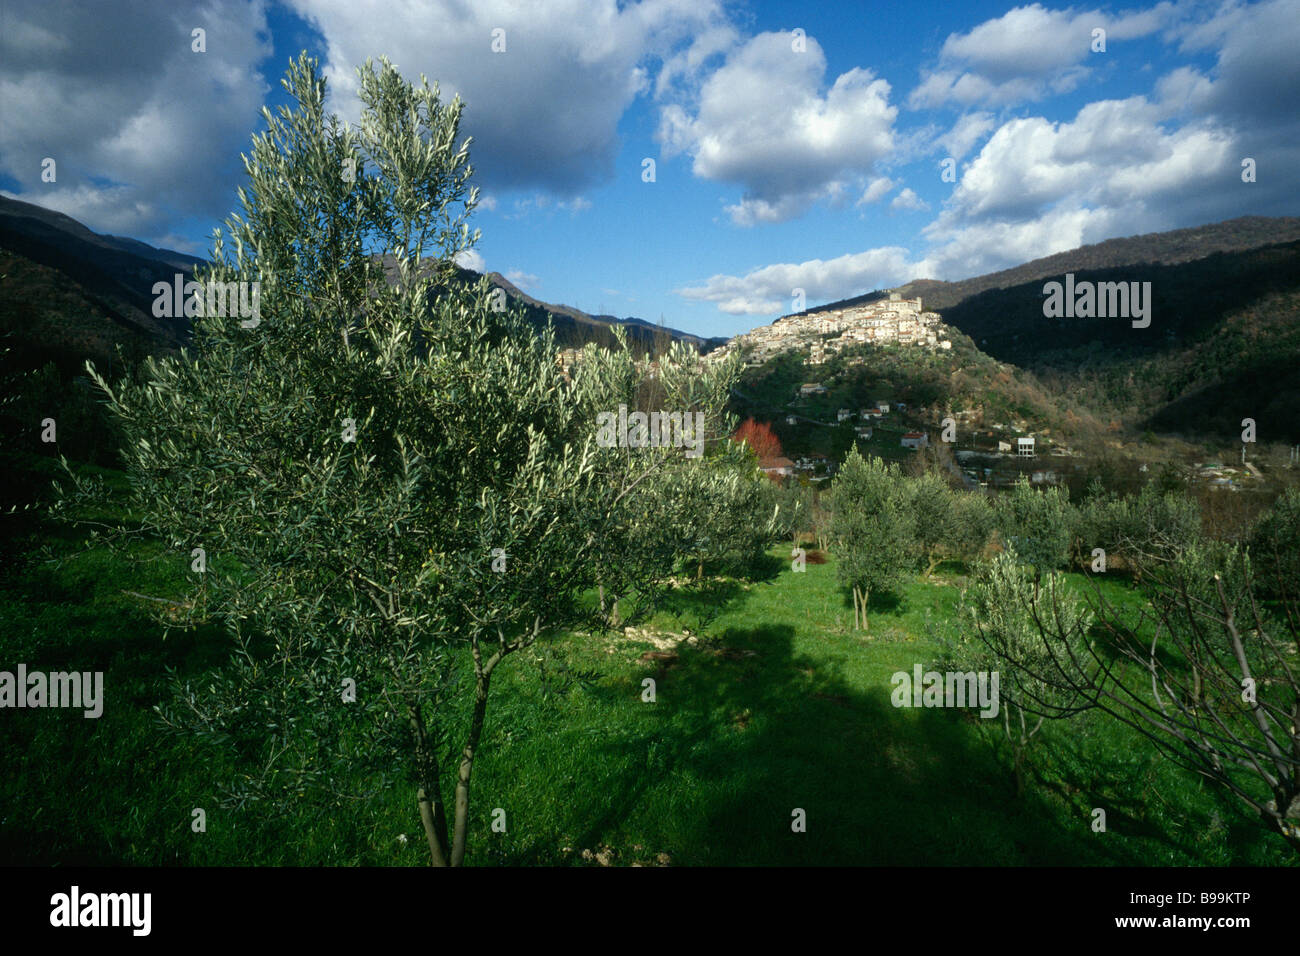 Licenza Lazio Italy The small hill town of Licenza overlooking olive groves Stock Photo